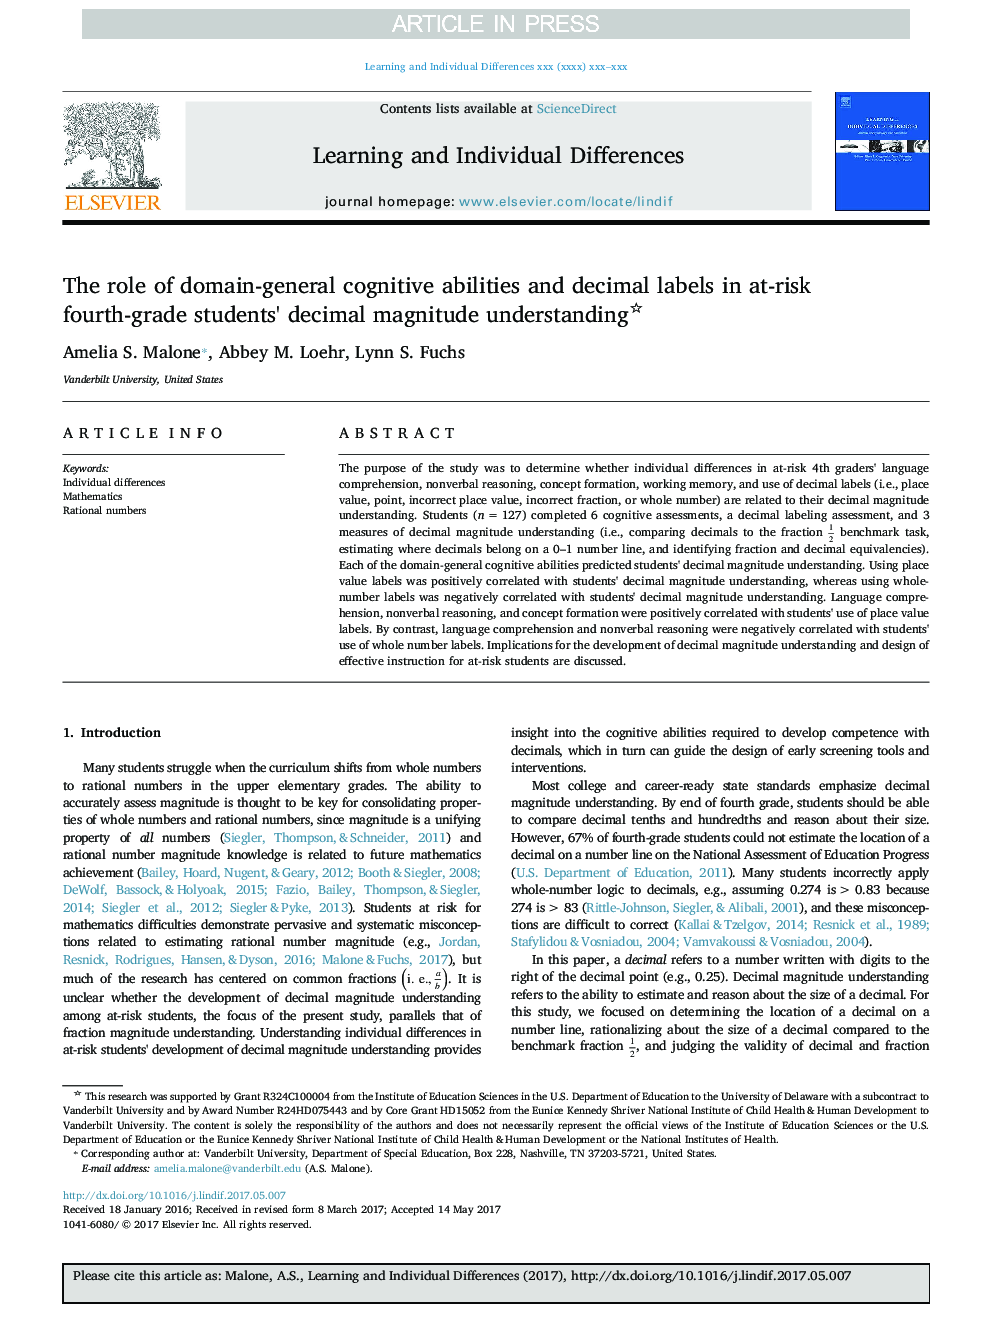 The role of domain-general cognitive abilities and decimal labels in at-risk fourth-grade students' decimal magnitude understanding